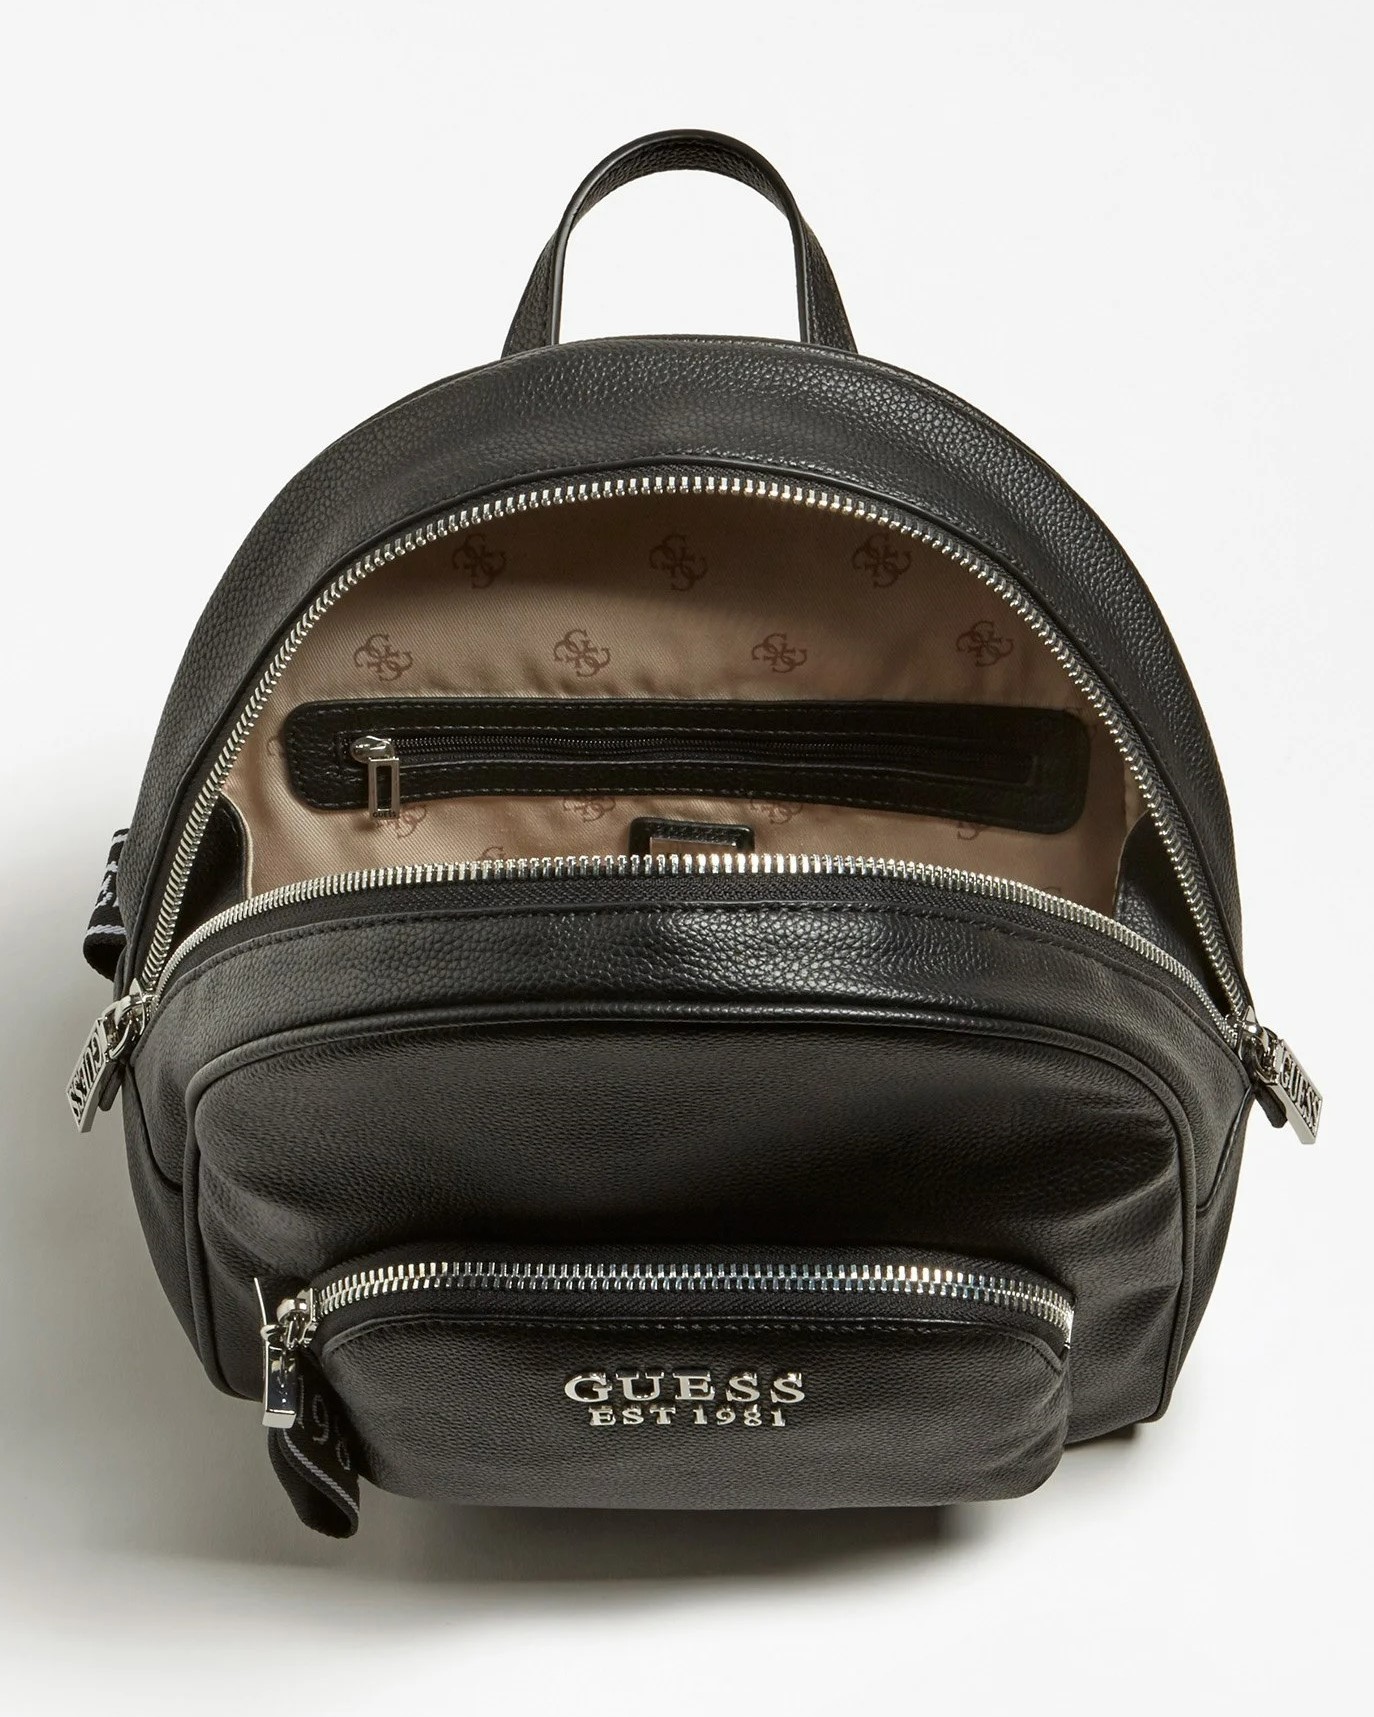 BALO GUESS BACKPACK 6